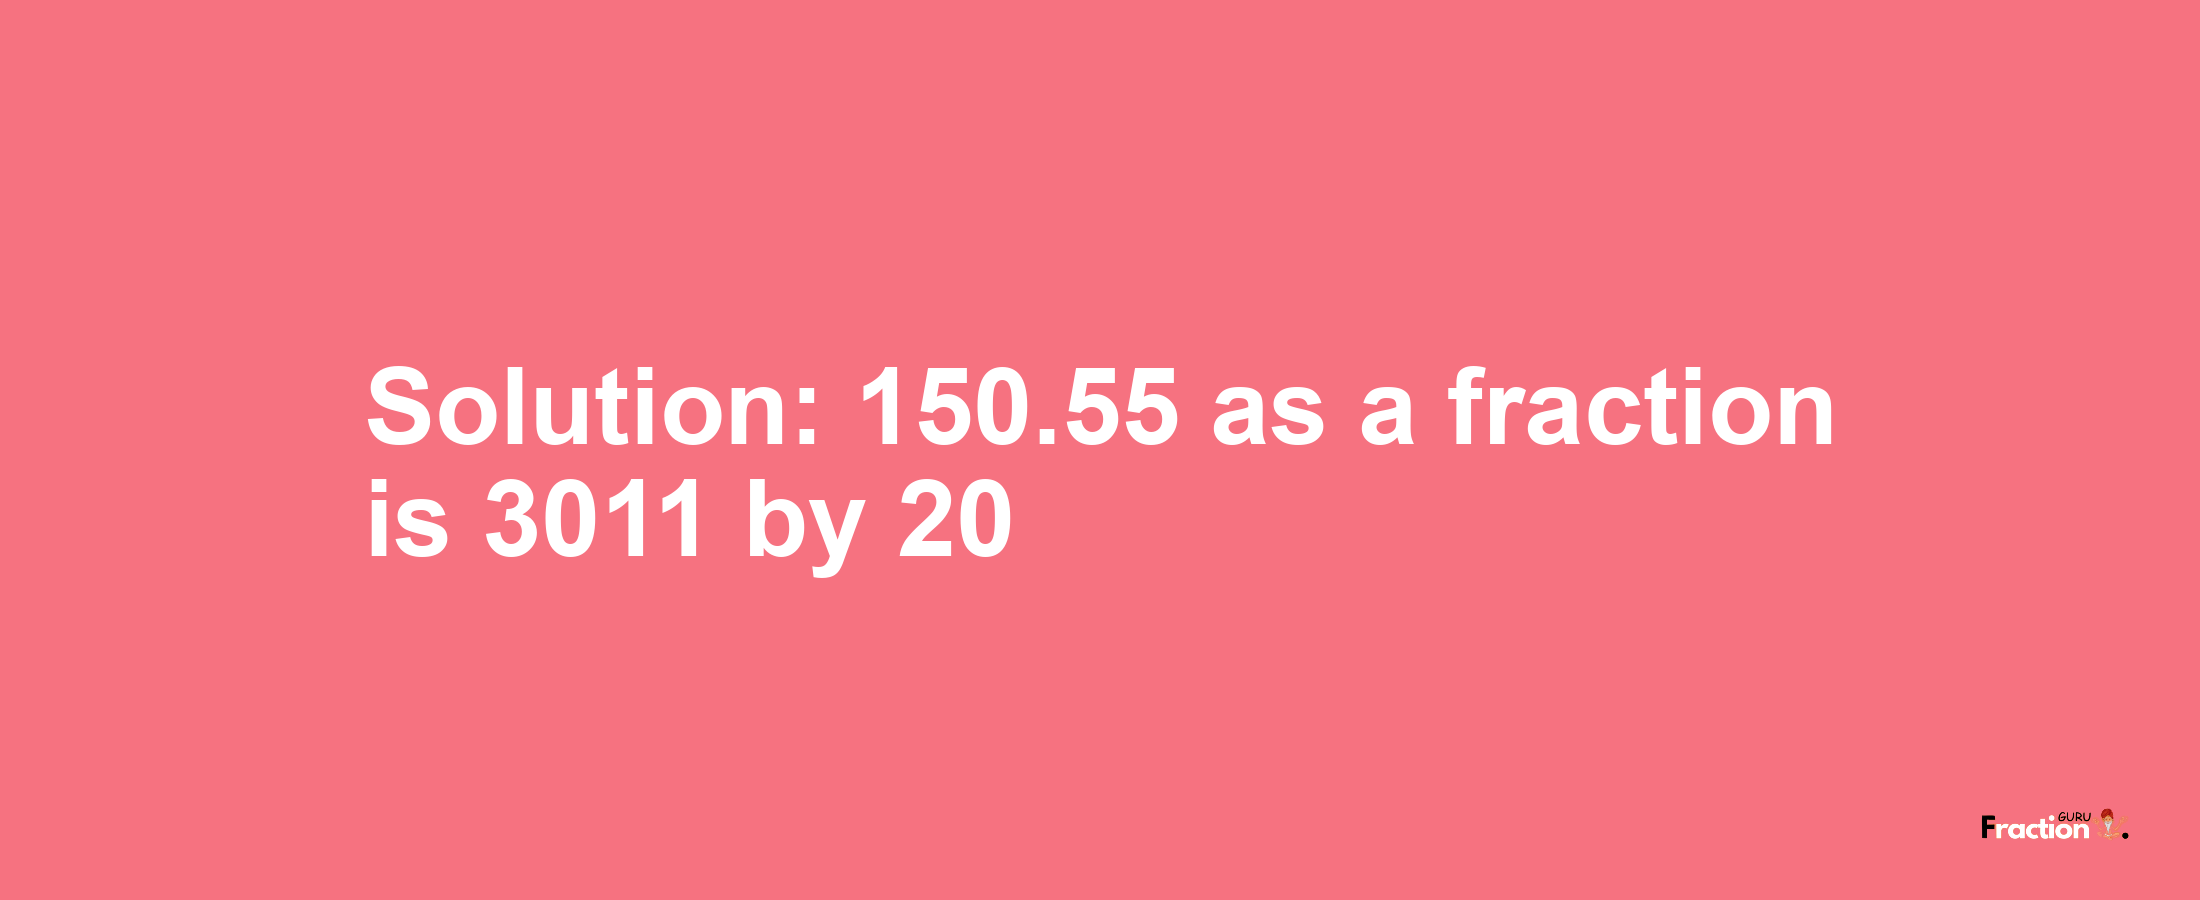 Solution:150.55 as a fraction is 3011/20